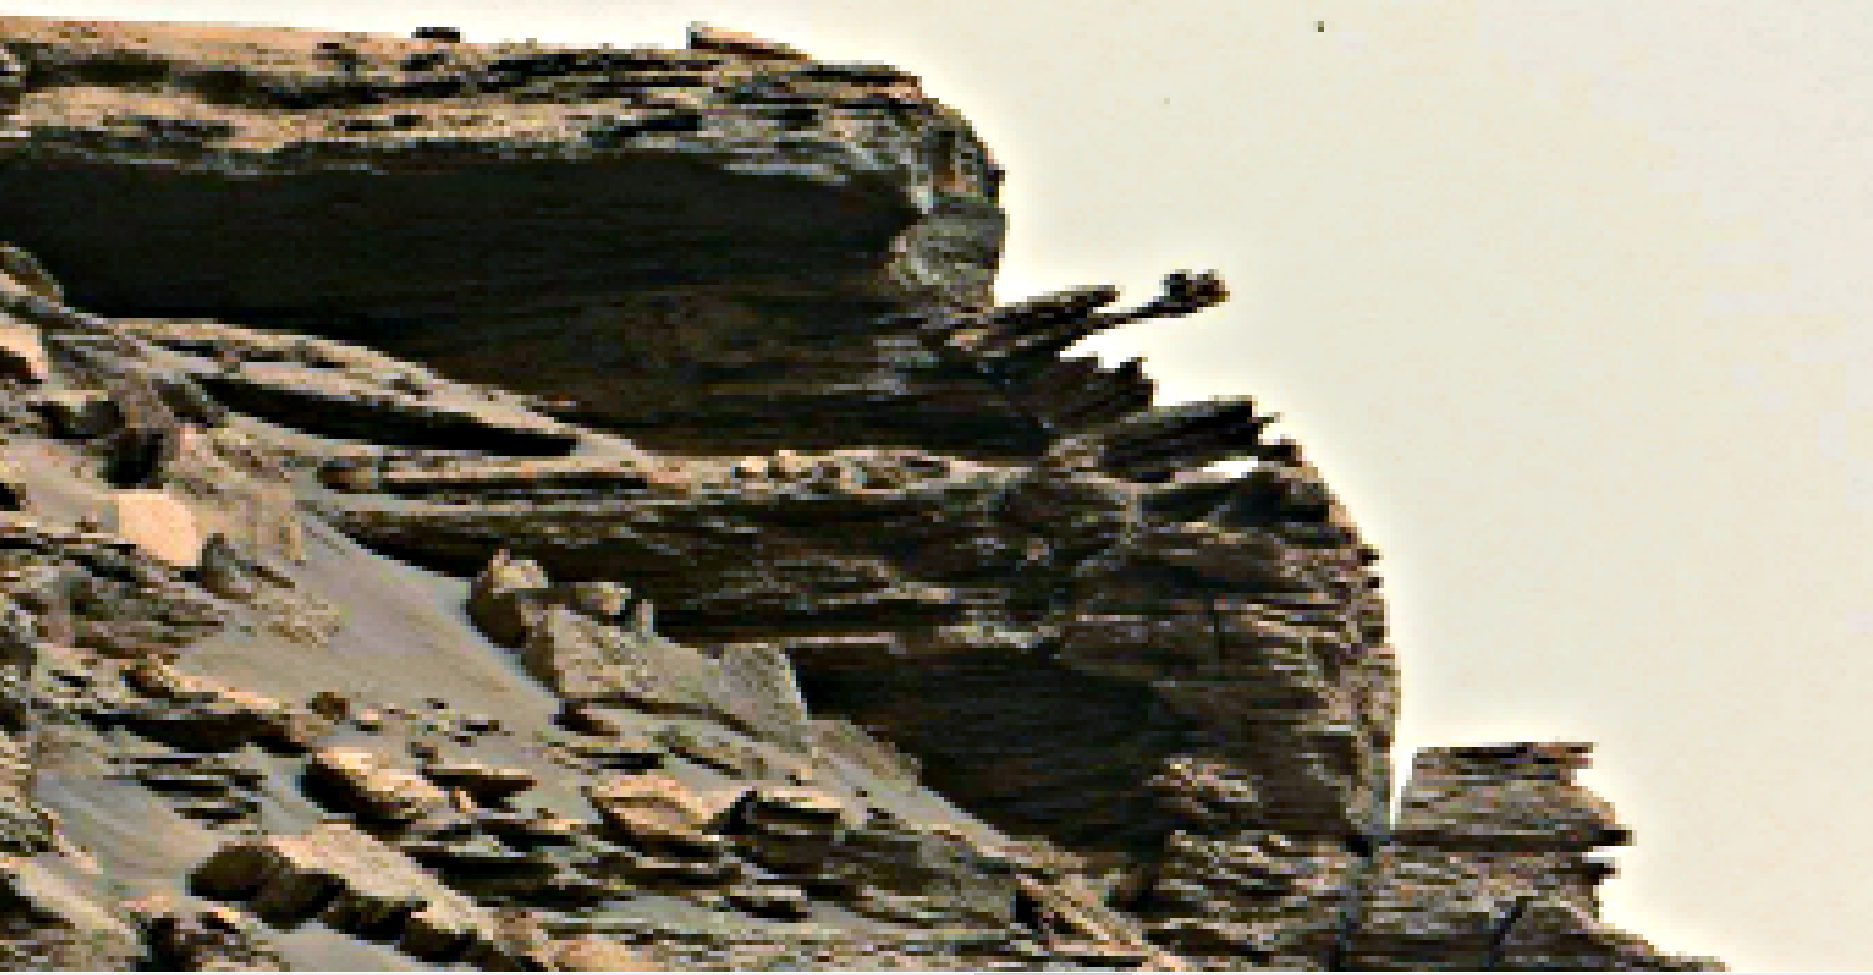 mars-sol-1448-anomaly-artifacts-16-was-life-on-mars